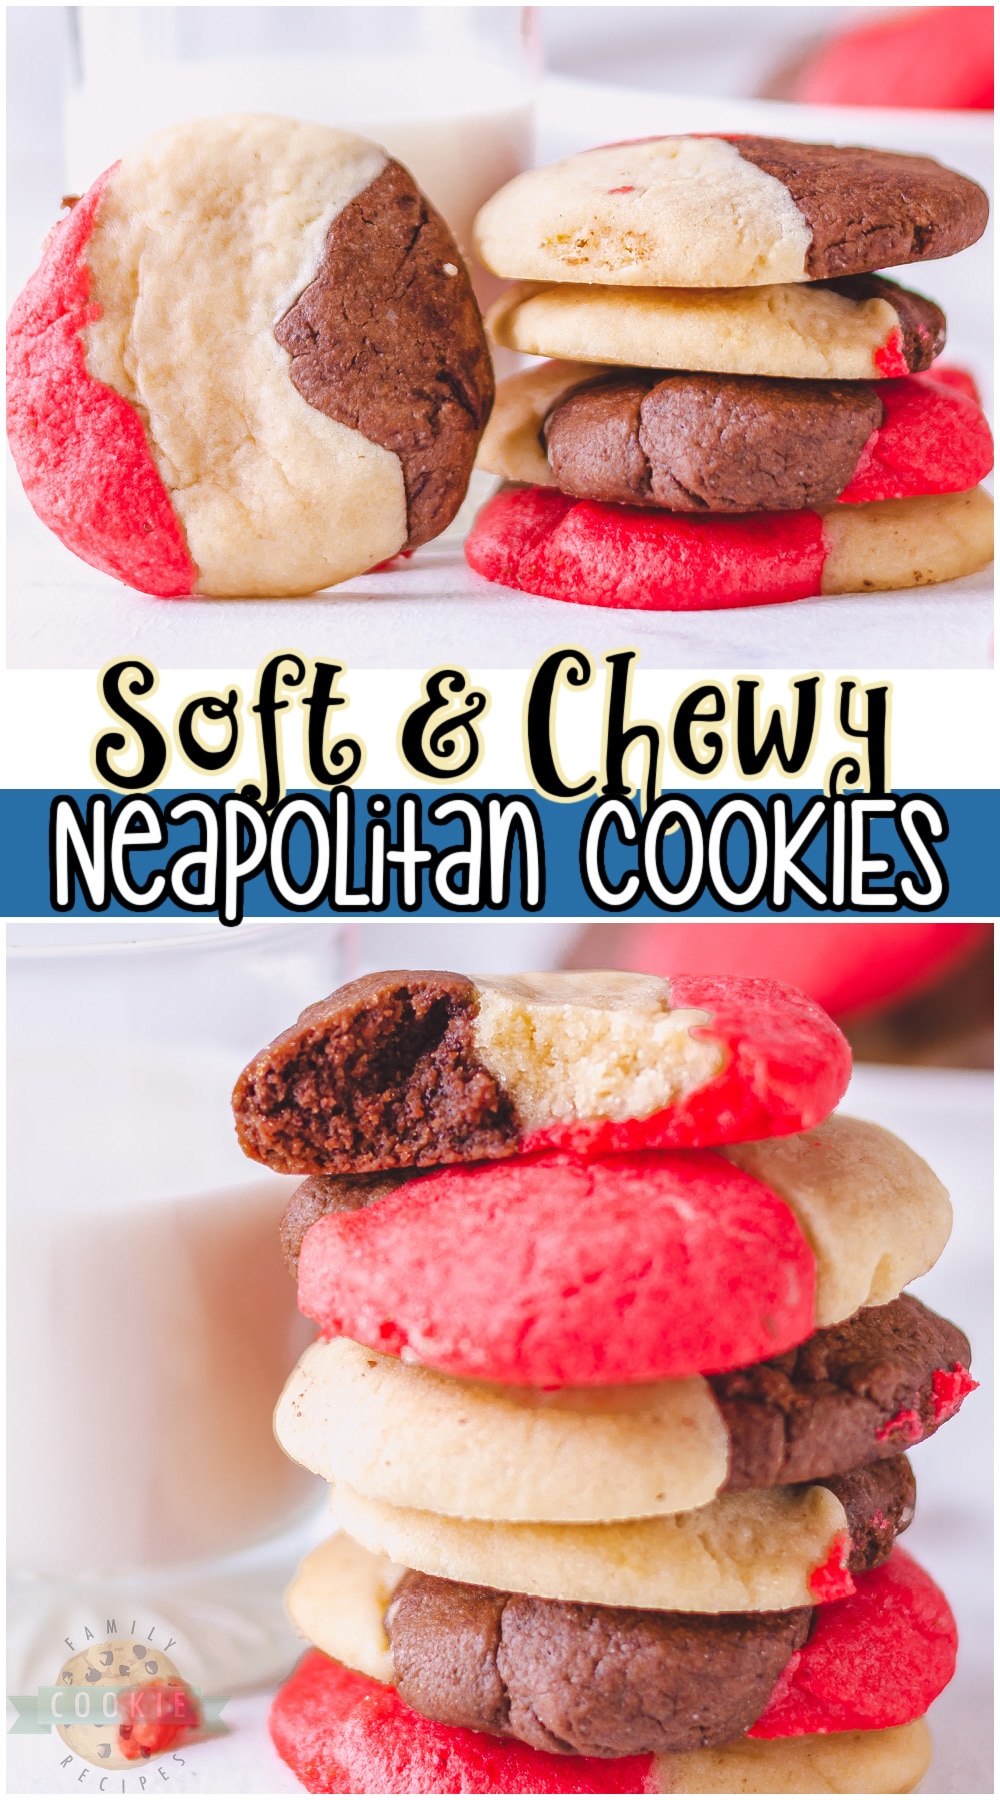 Neapolitan cookies are soft & chewy cookies that combine strawberry, chocolate & vanilla flavors! Just like the classic ice cream flavor, Neapolitan makes for a fun & tasty cookie recipe!  via @buttergirls